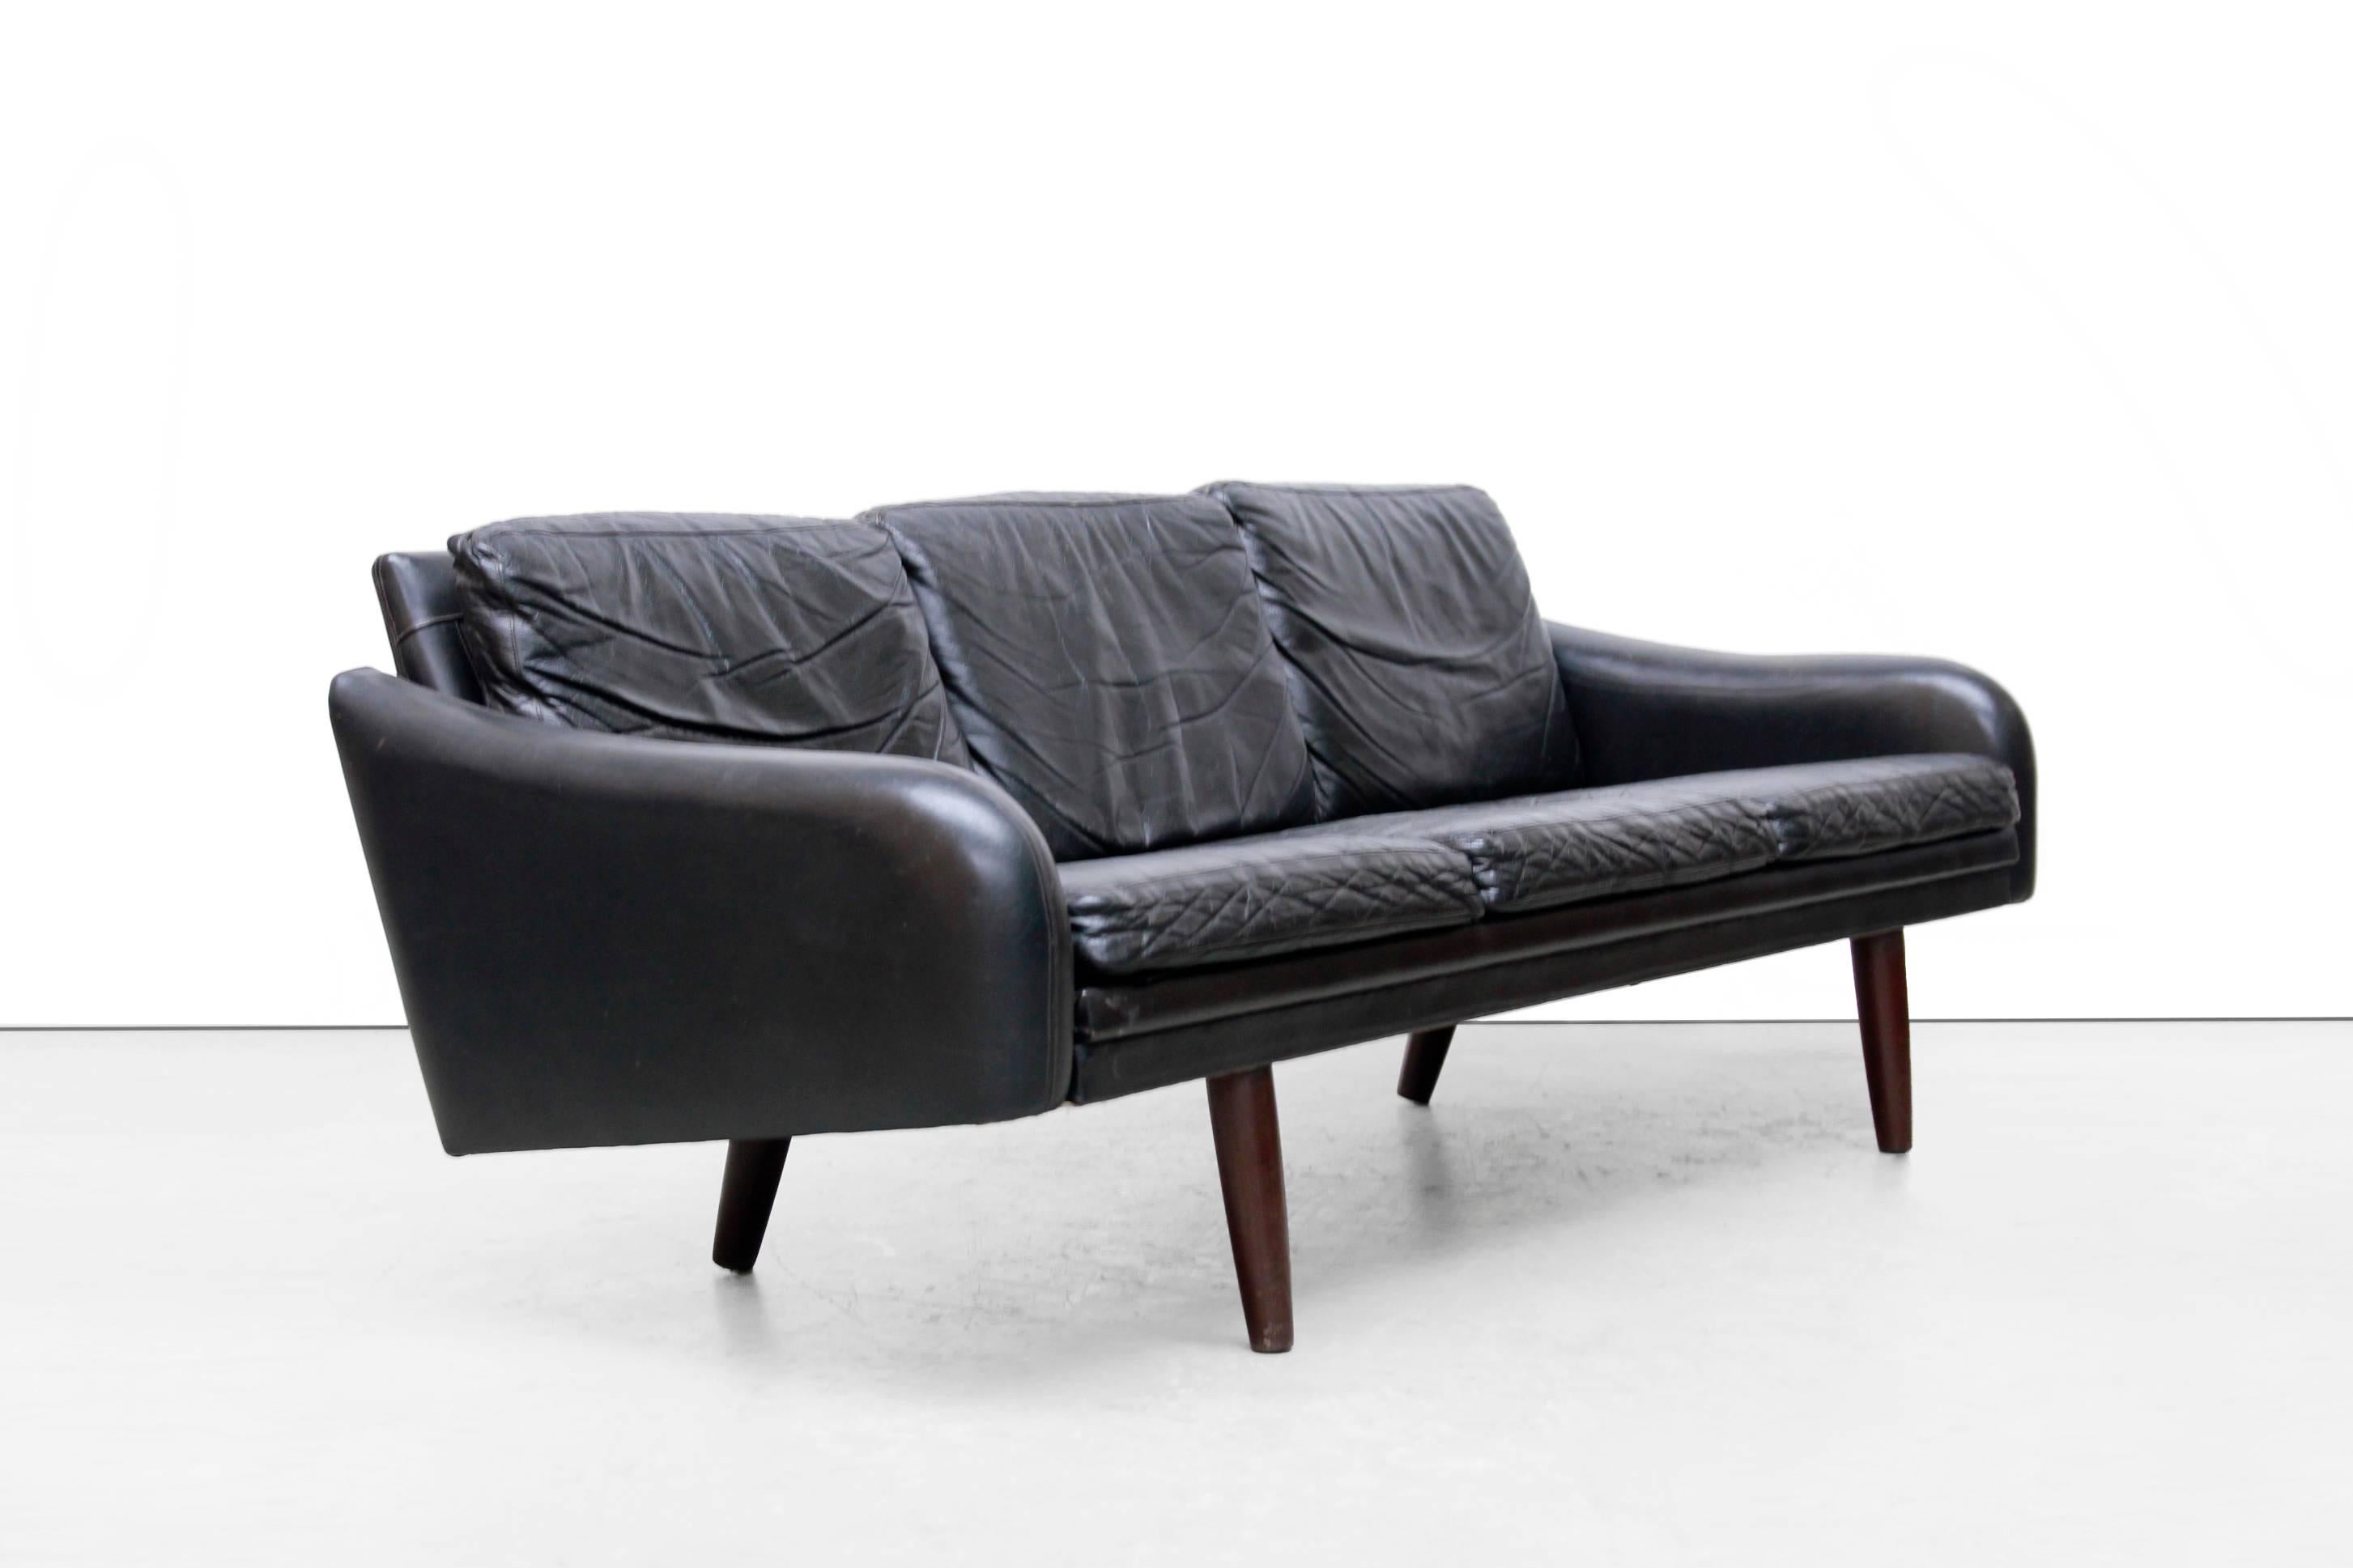 Black leather three-seat sofa from Danish furniture manufacturer. This sofa offers space for three people and is made of thick black leather with conical wooden legs. The armrests have a beautiful design, the high legs creates visual space, while it